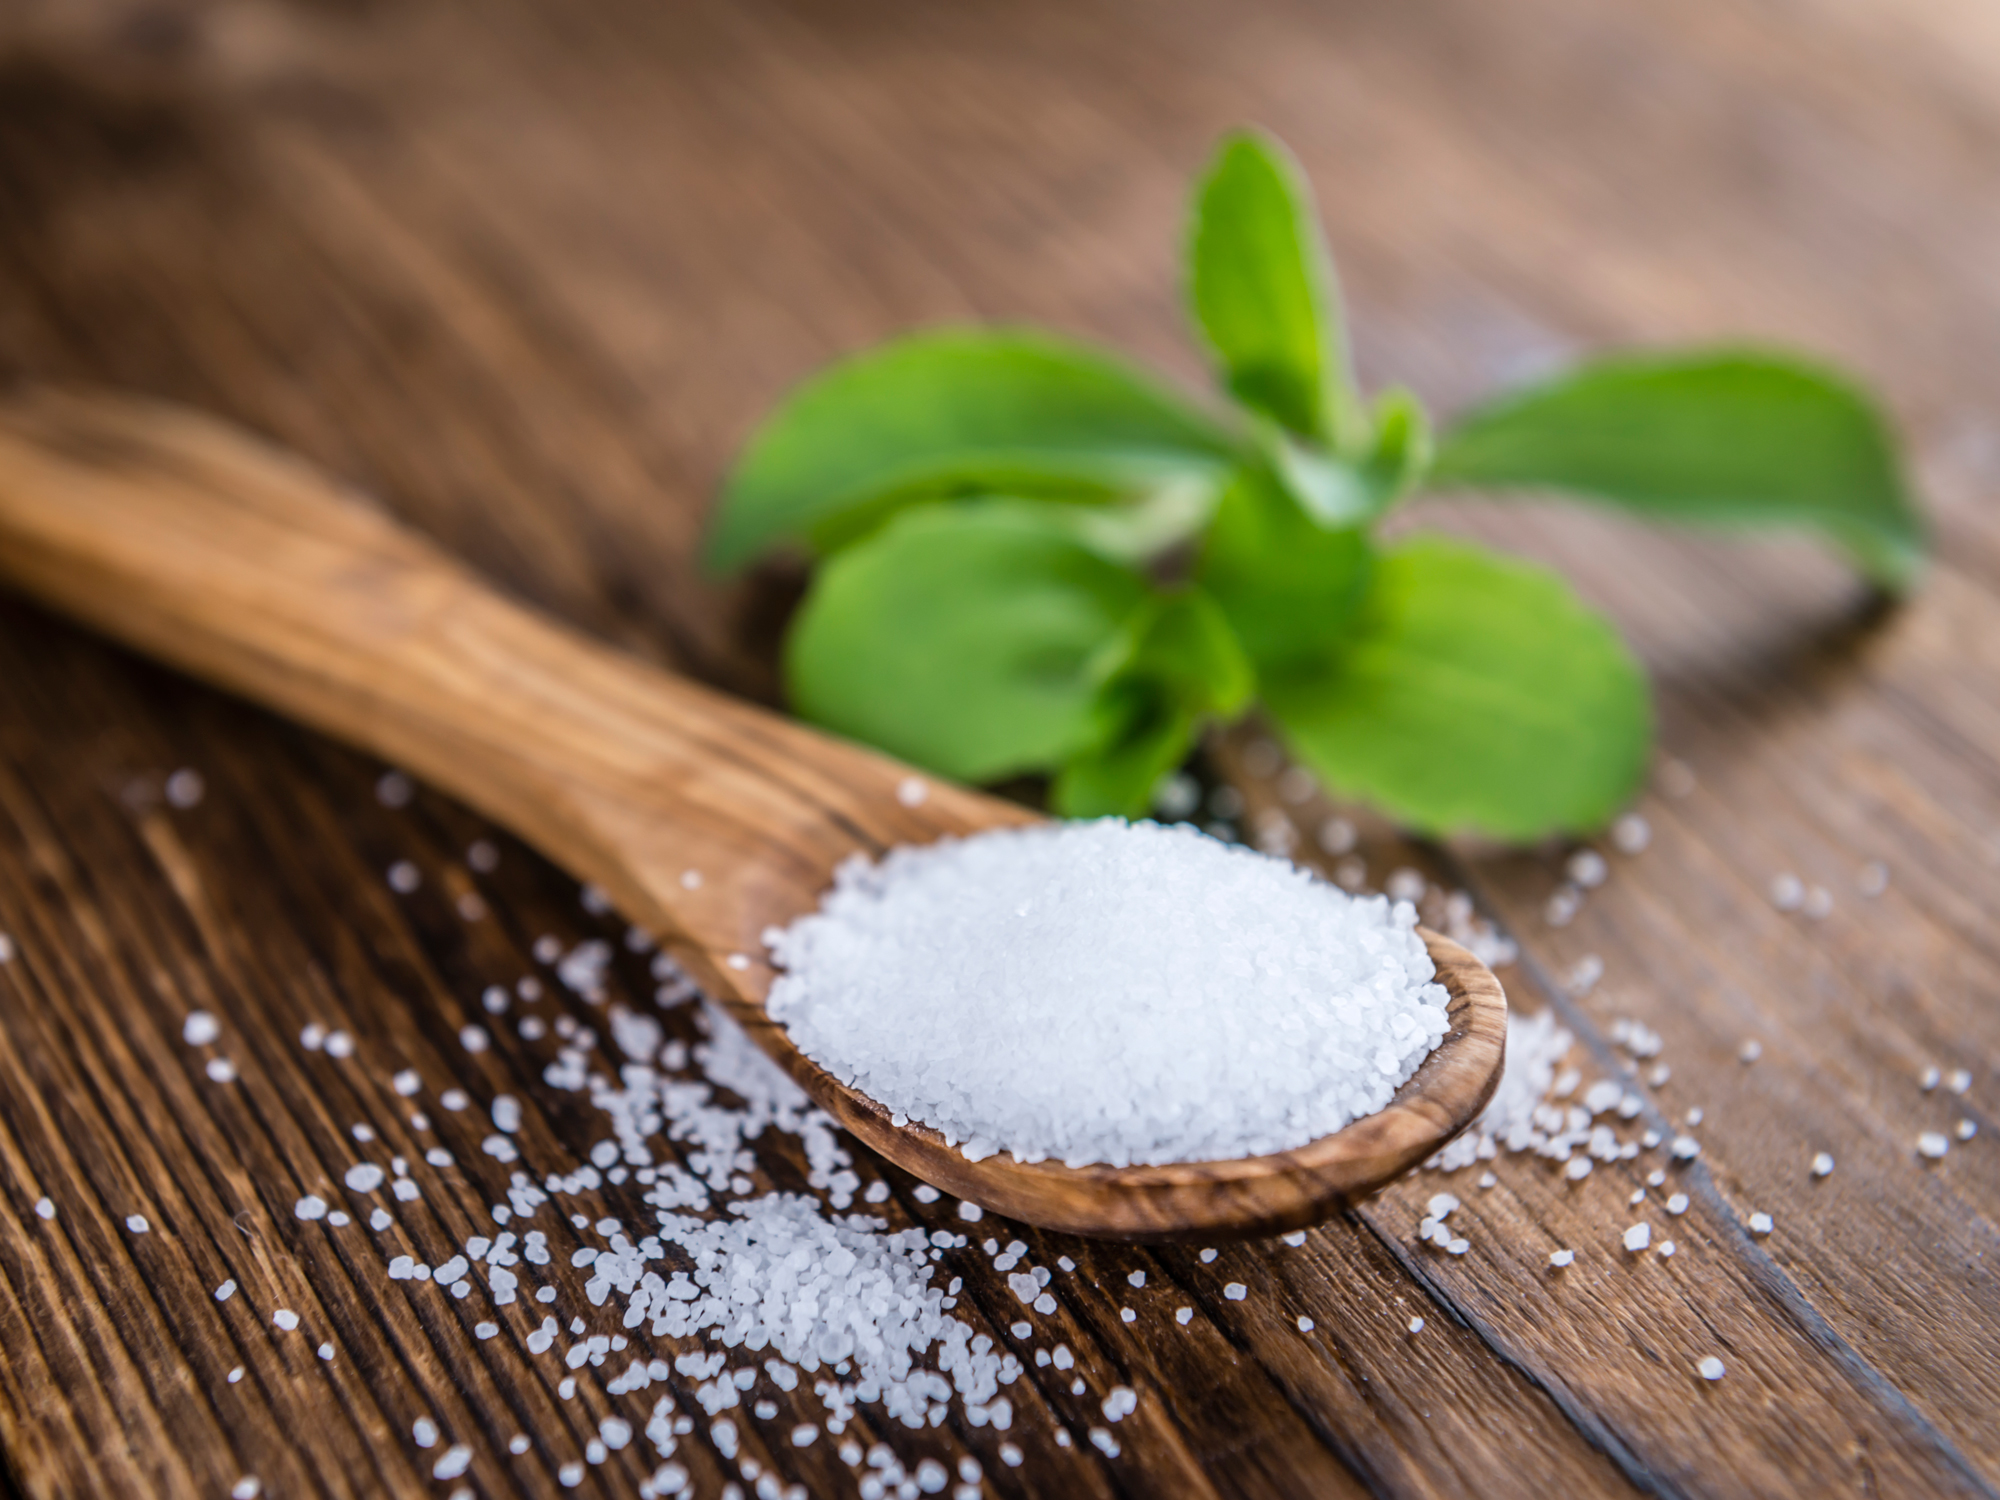 Could stevia protect you from Lyme disease?